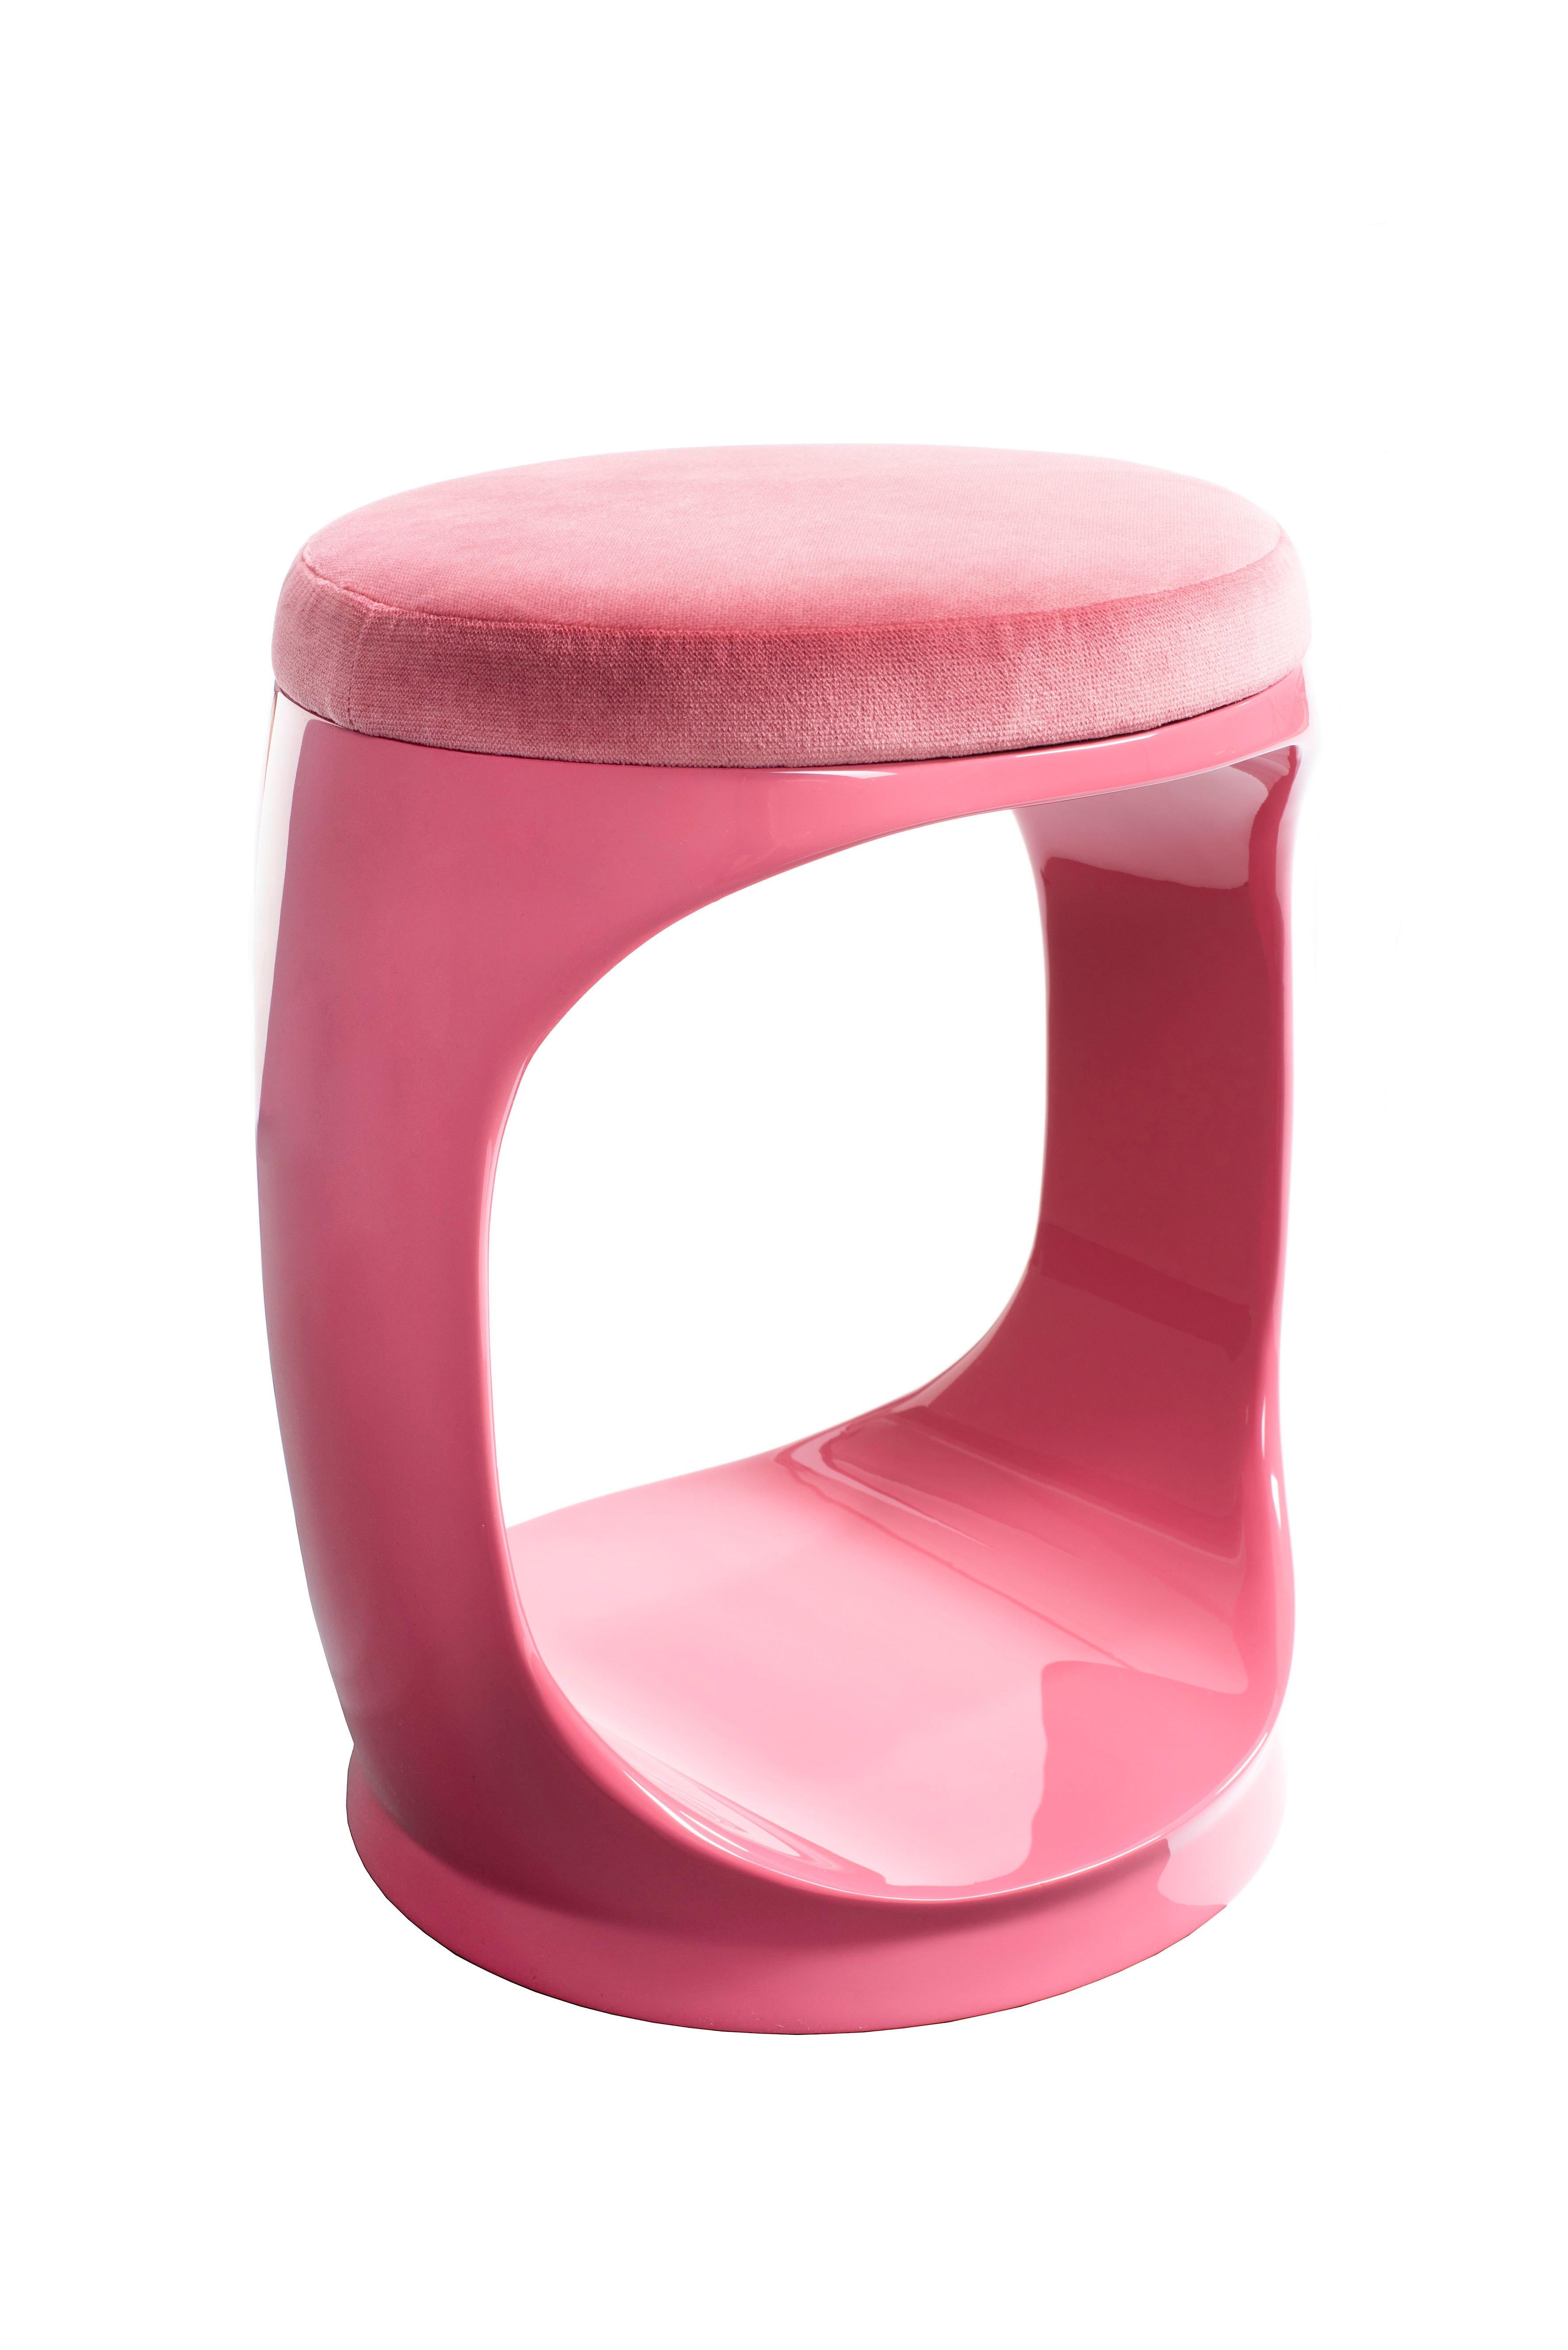 Organic Modern Contemporary Stool by Cyril Rumpler Signet Ring, Pouf Seats Pink For Sale